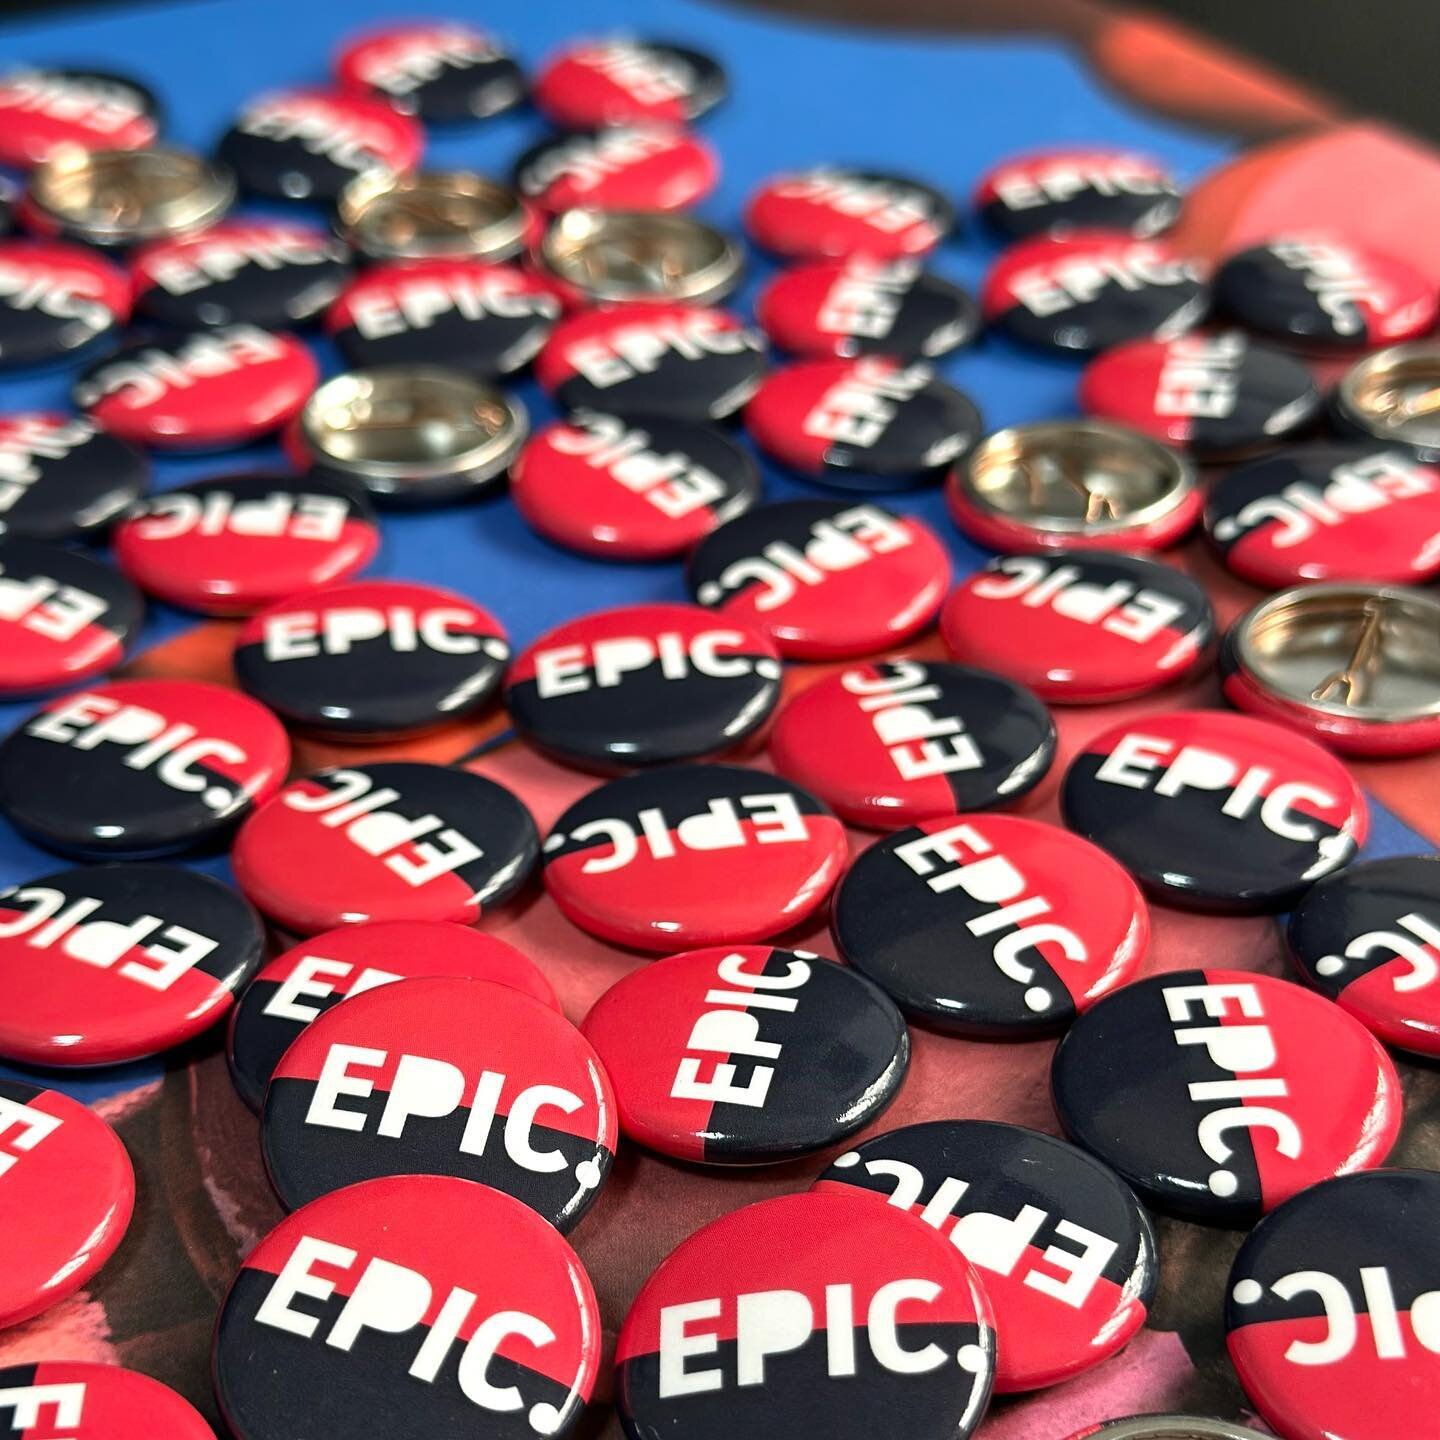 A bucketload of badges for EPIC - the Energy Powered Innovation Challenge with UNE SRI. EPIC invites people from varied backgrounds to come together with industry, technologists, students, community, researchers and investors to help solve key energy